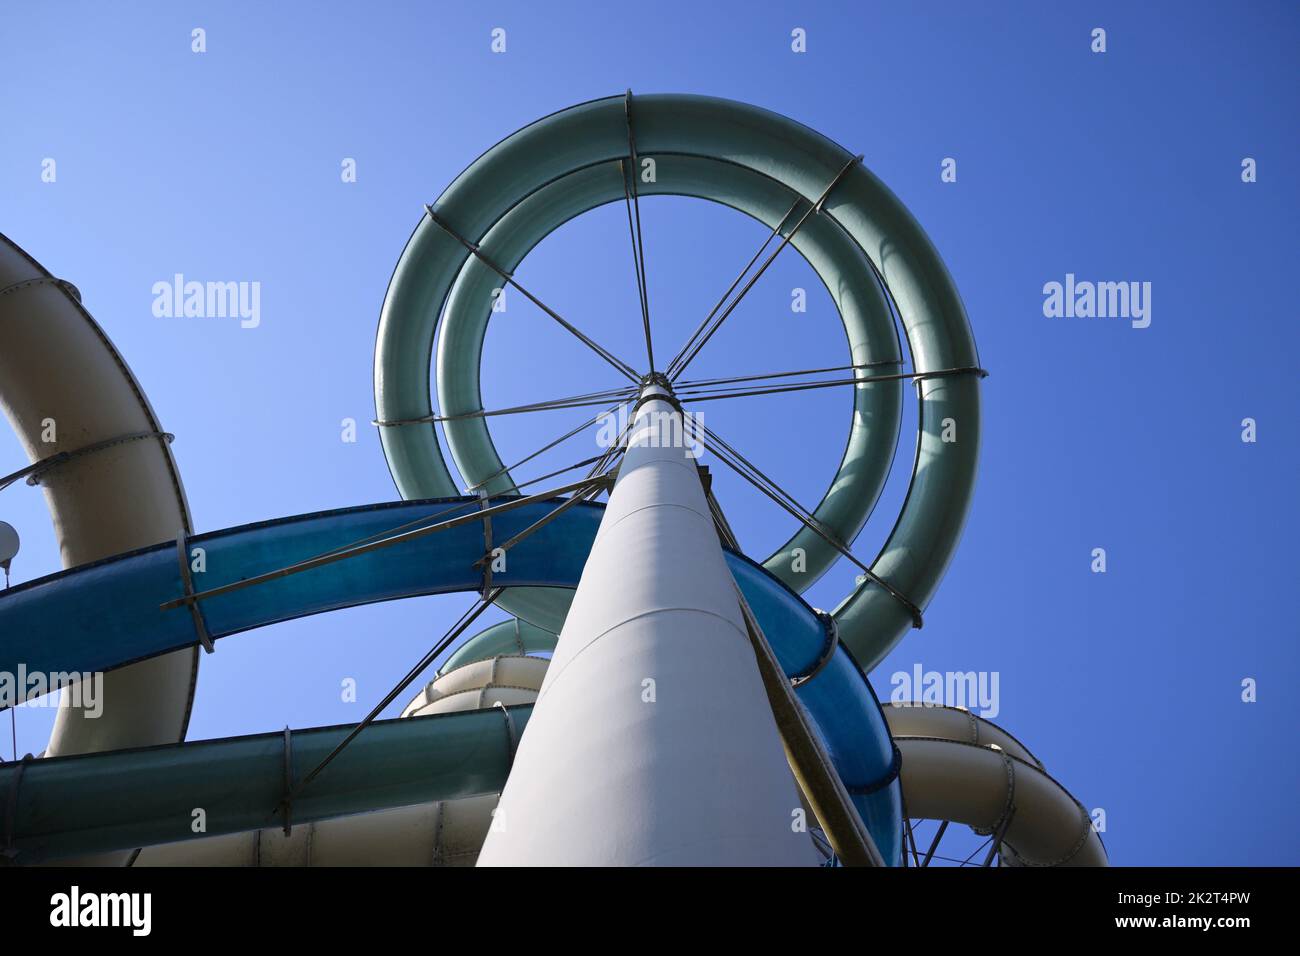 Colorful aqua park pipes viewed low angle Stock Photo